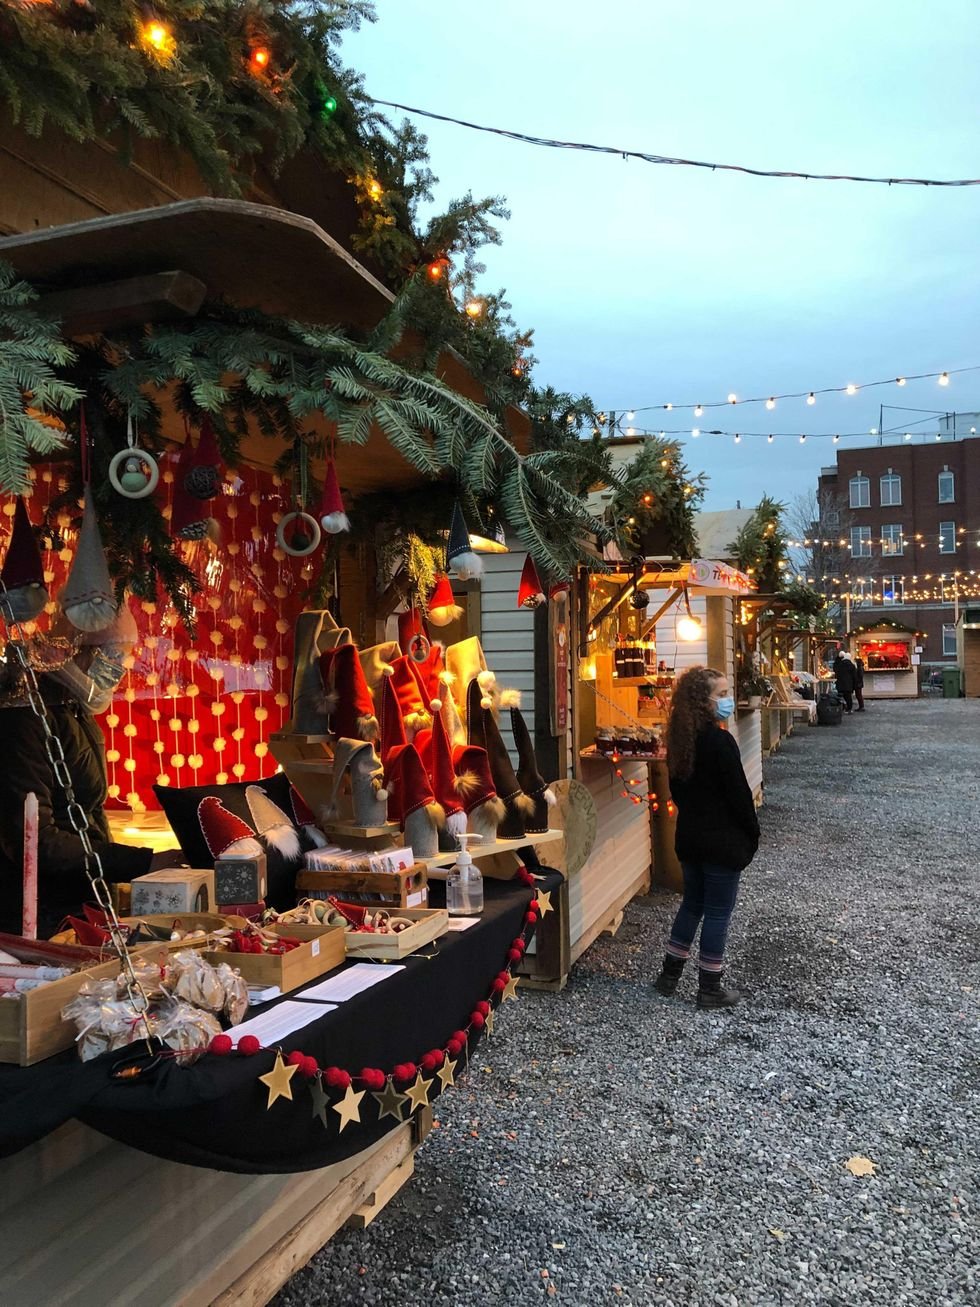 Montreal's Atwater Christmas Village Is Now Open & It's Pure Holiday Magic